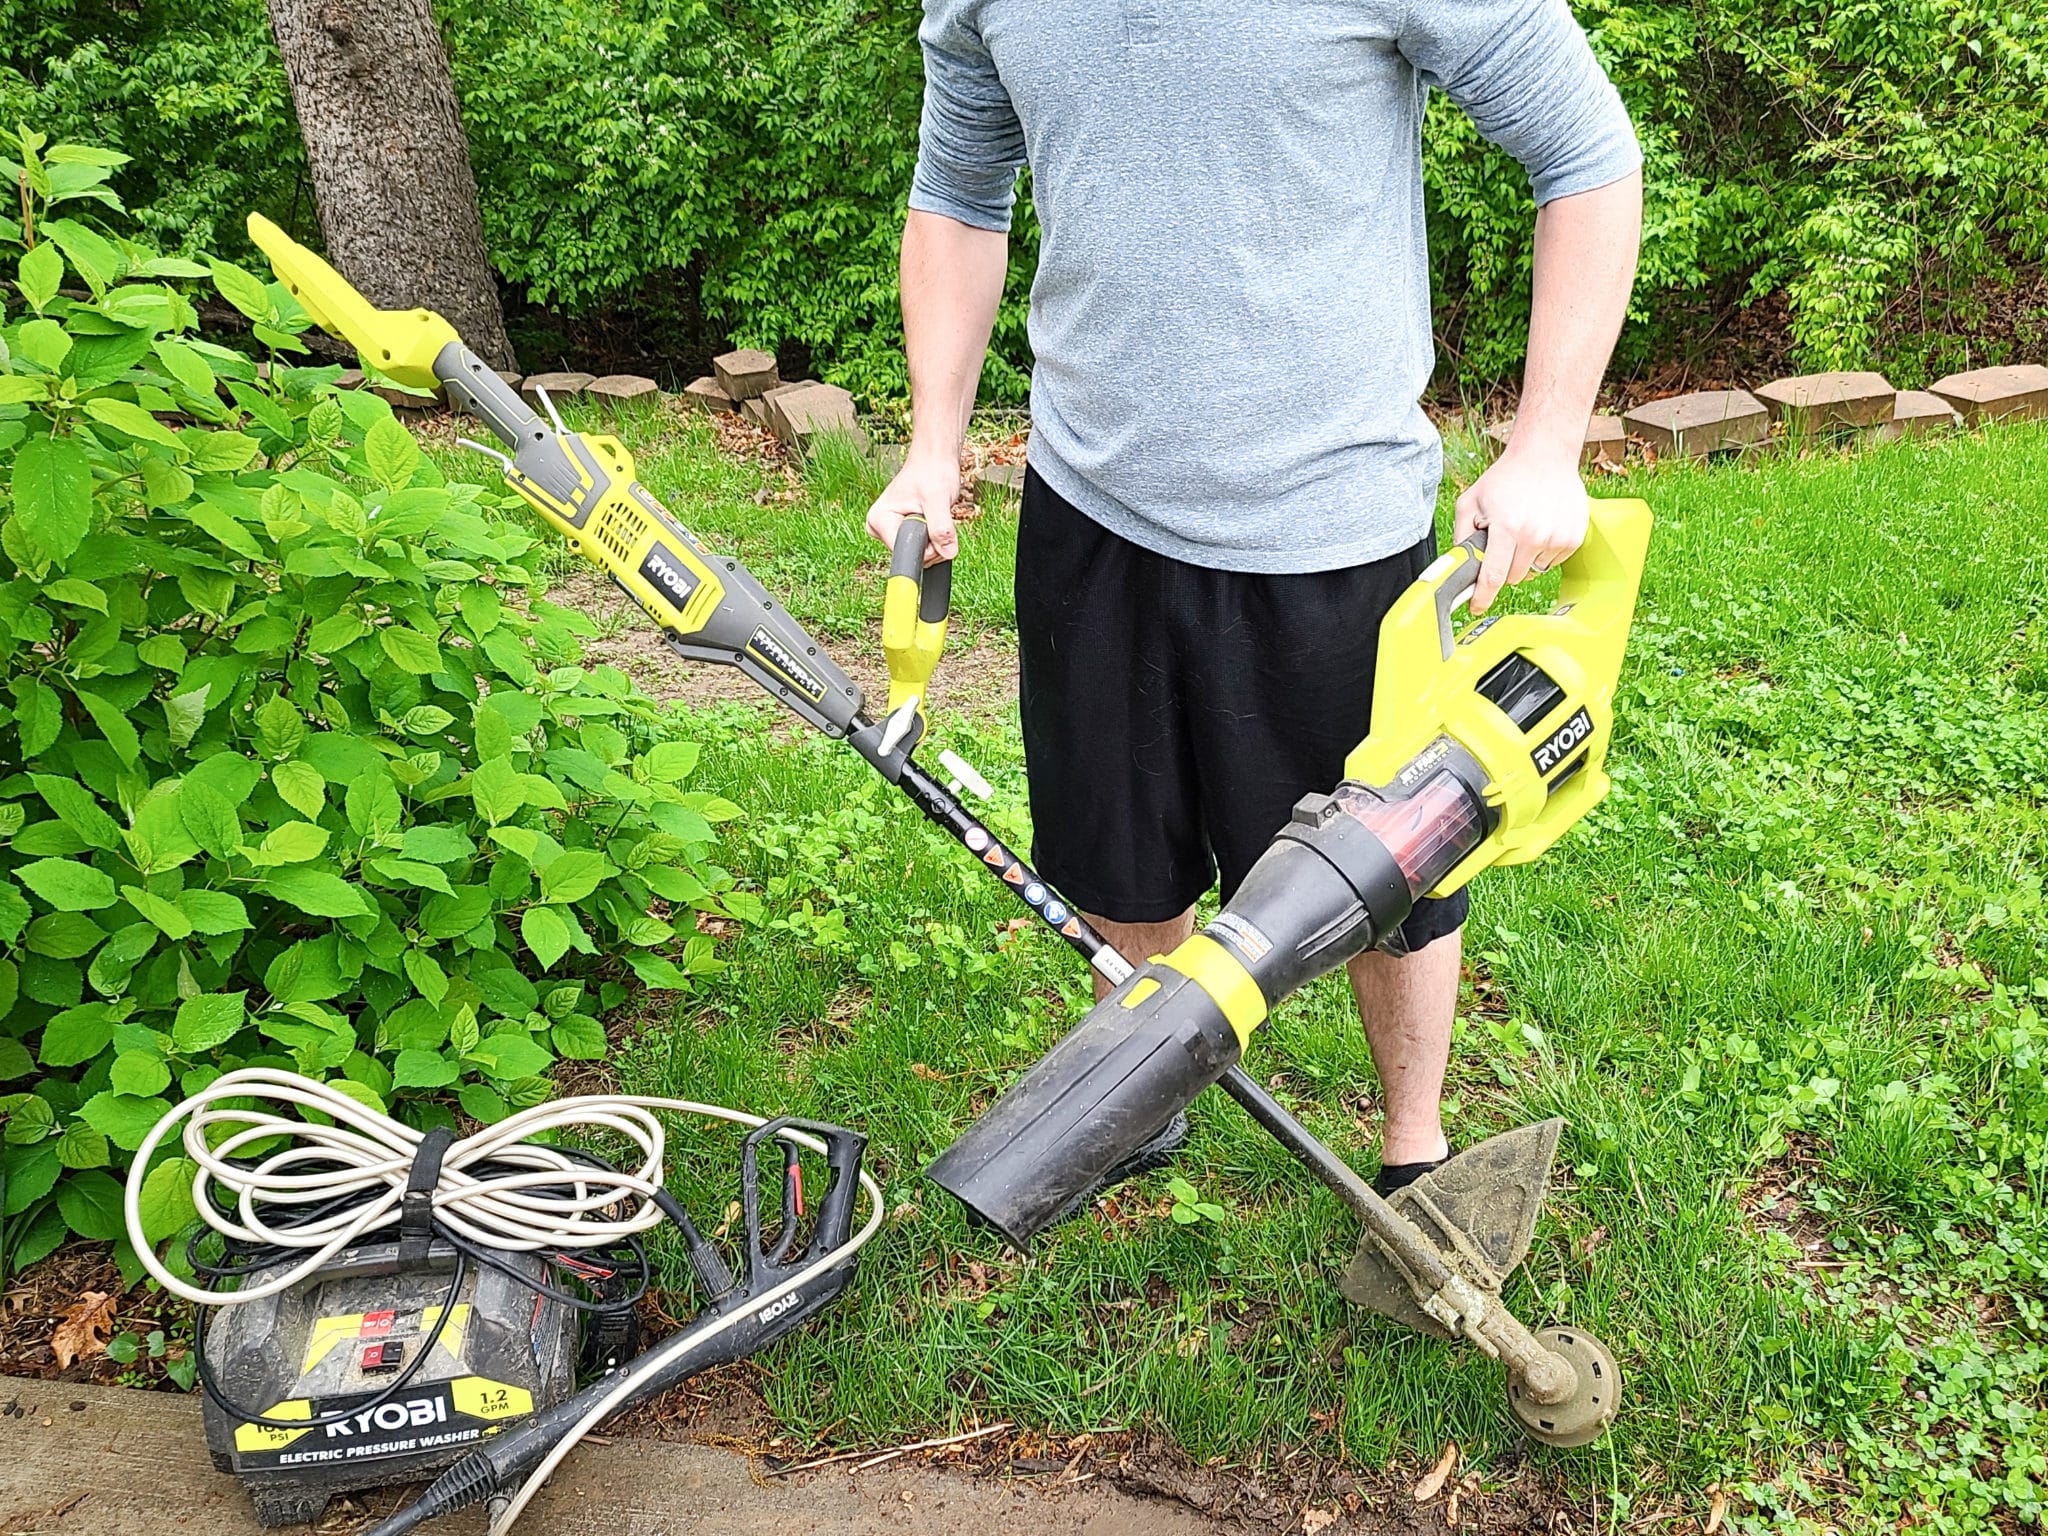 gift ideas for Father's Day from wife - electric tools